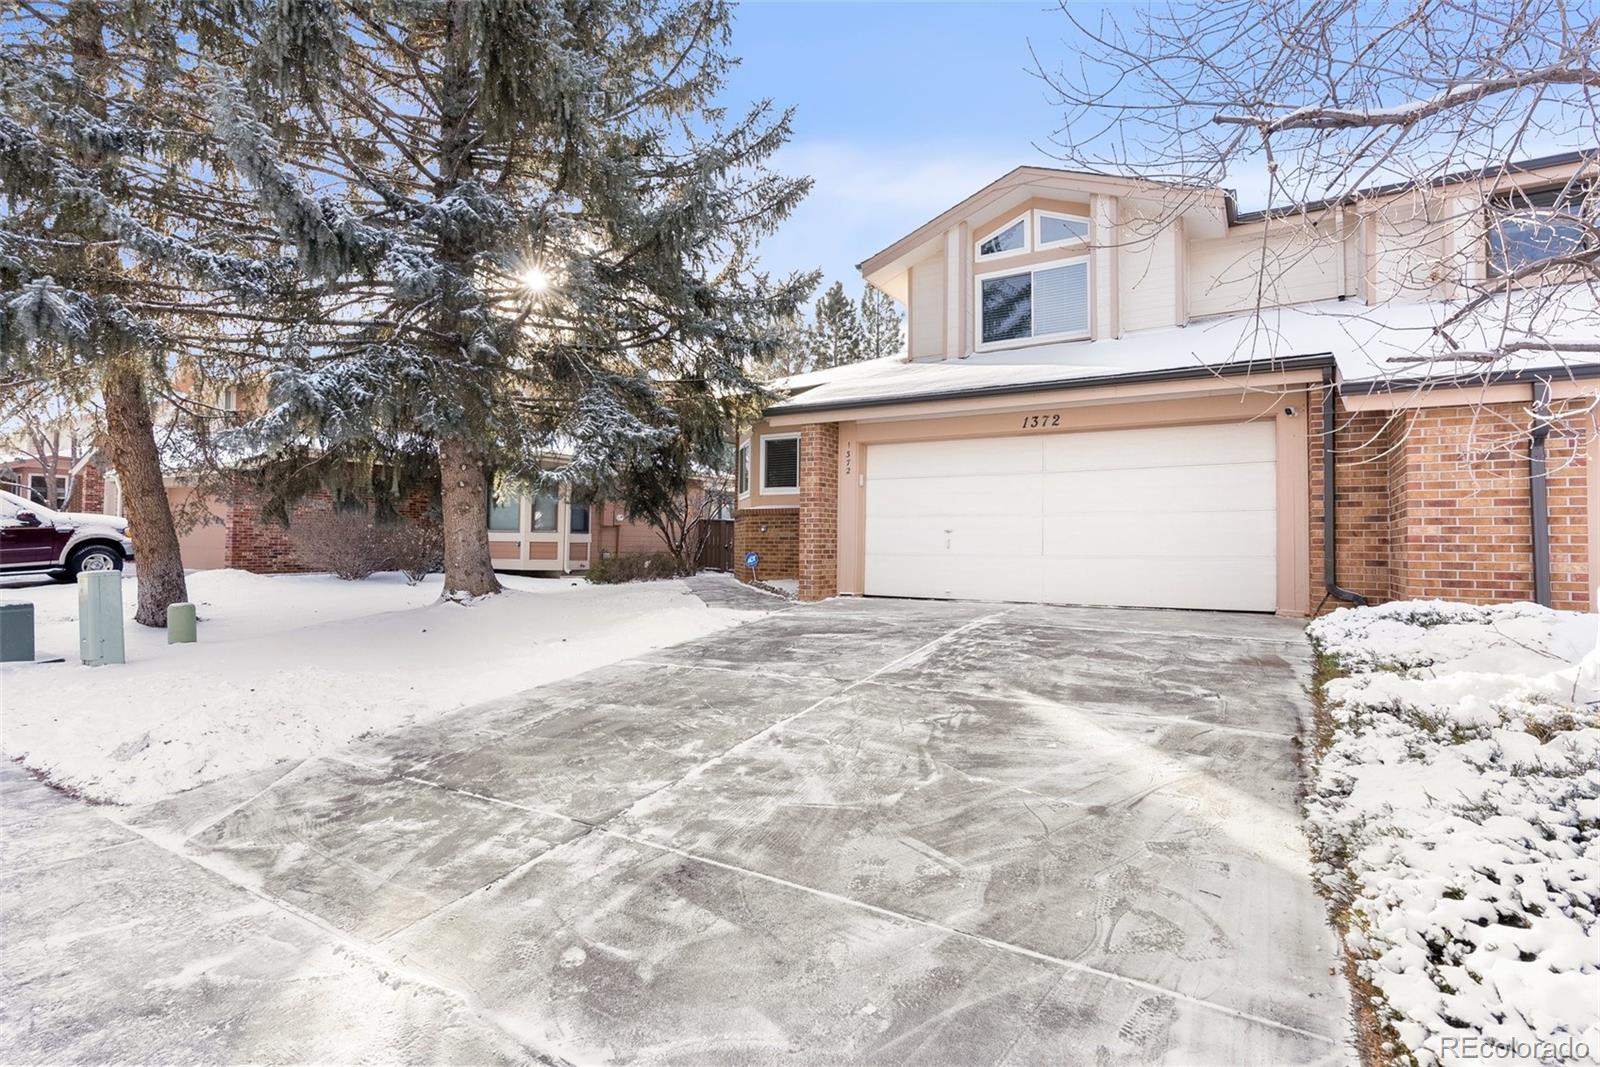 Report Image for 1372  Northcrest Drive,Highlands Ranch, Colorado